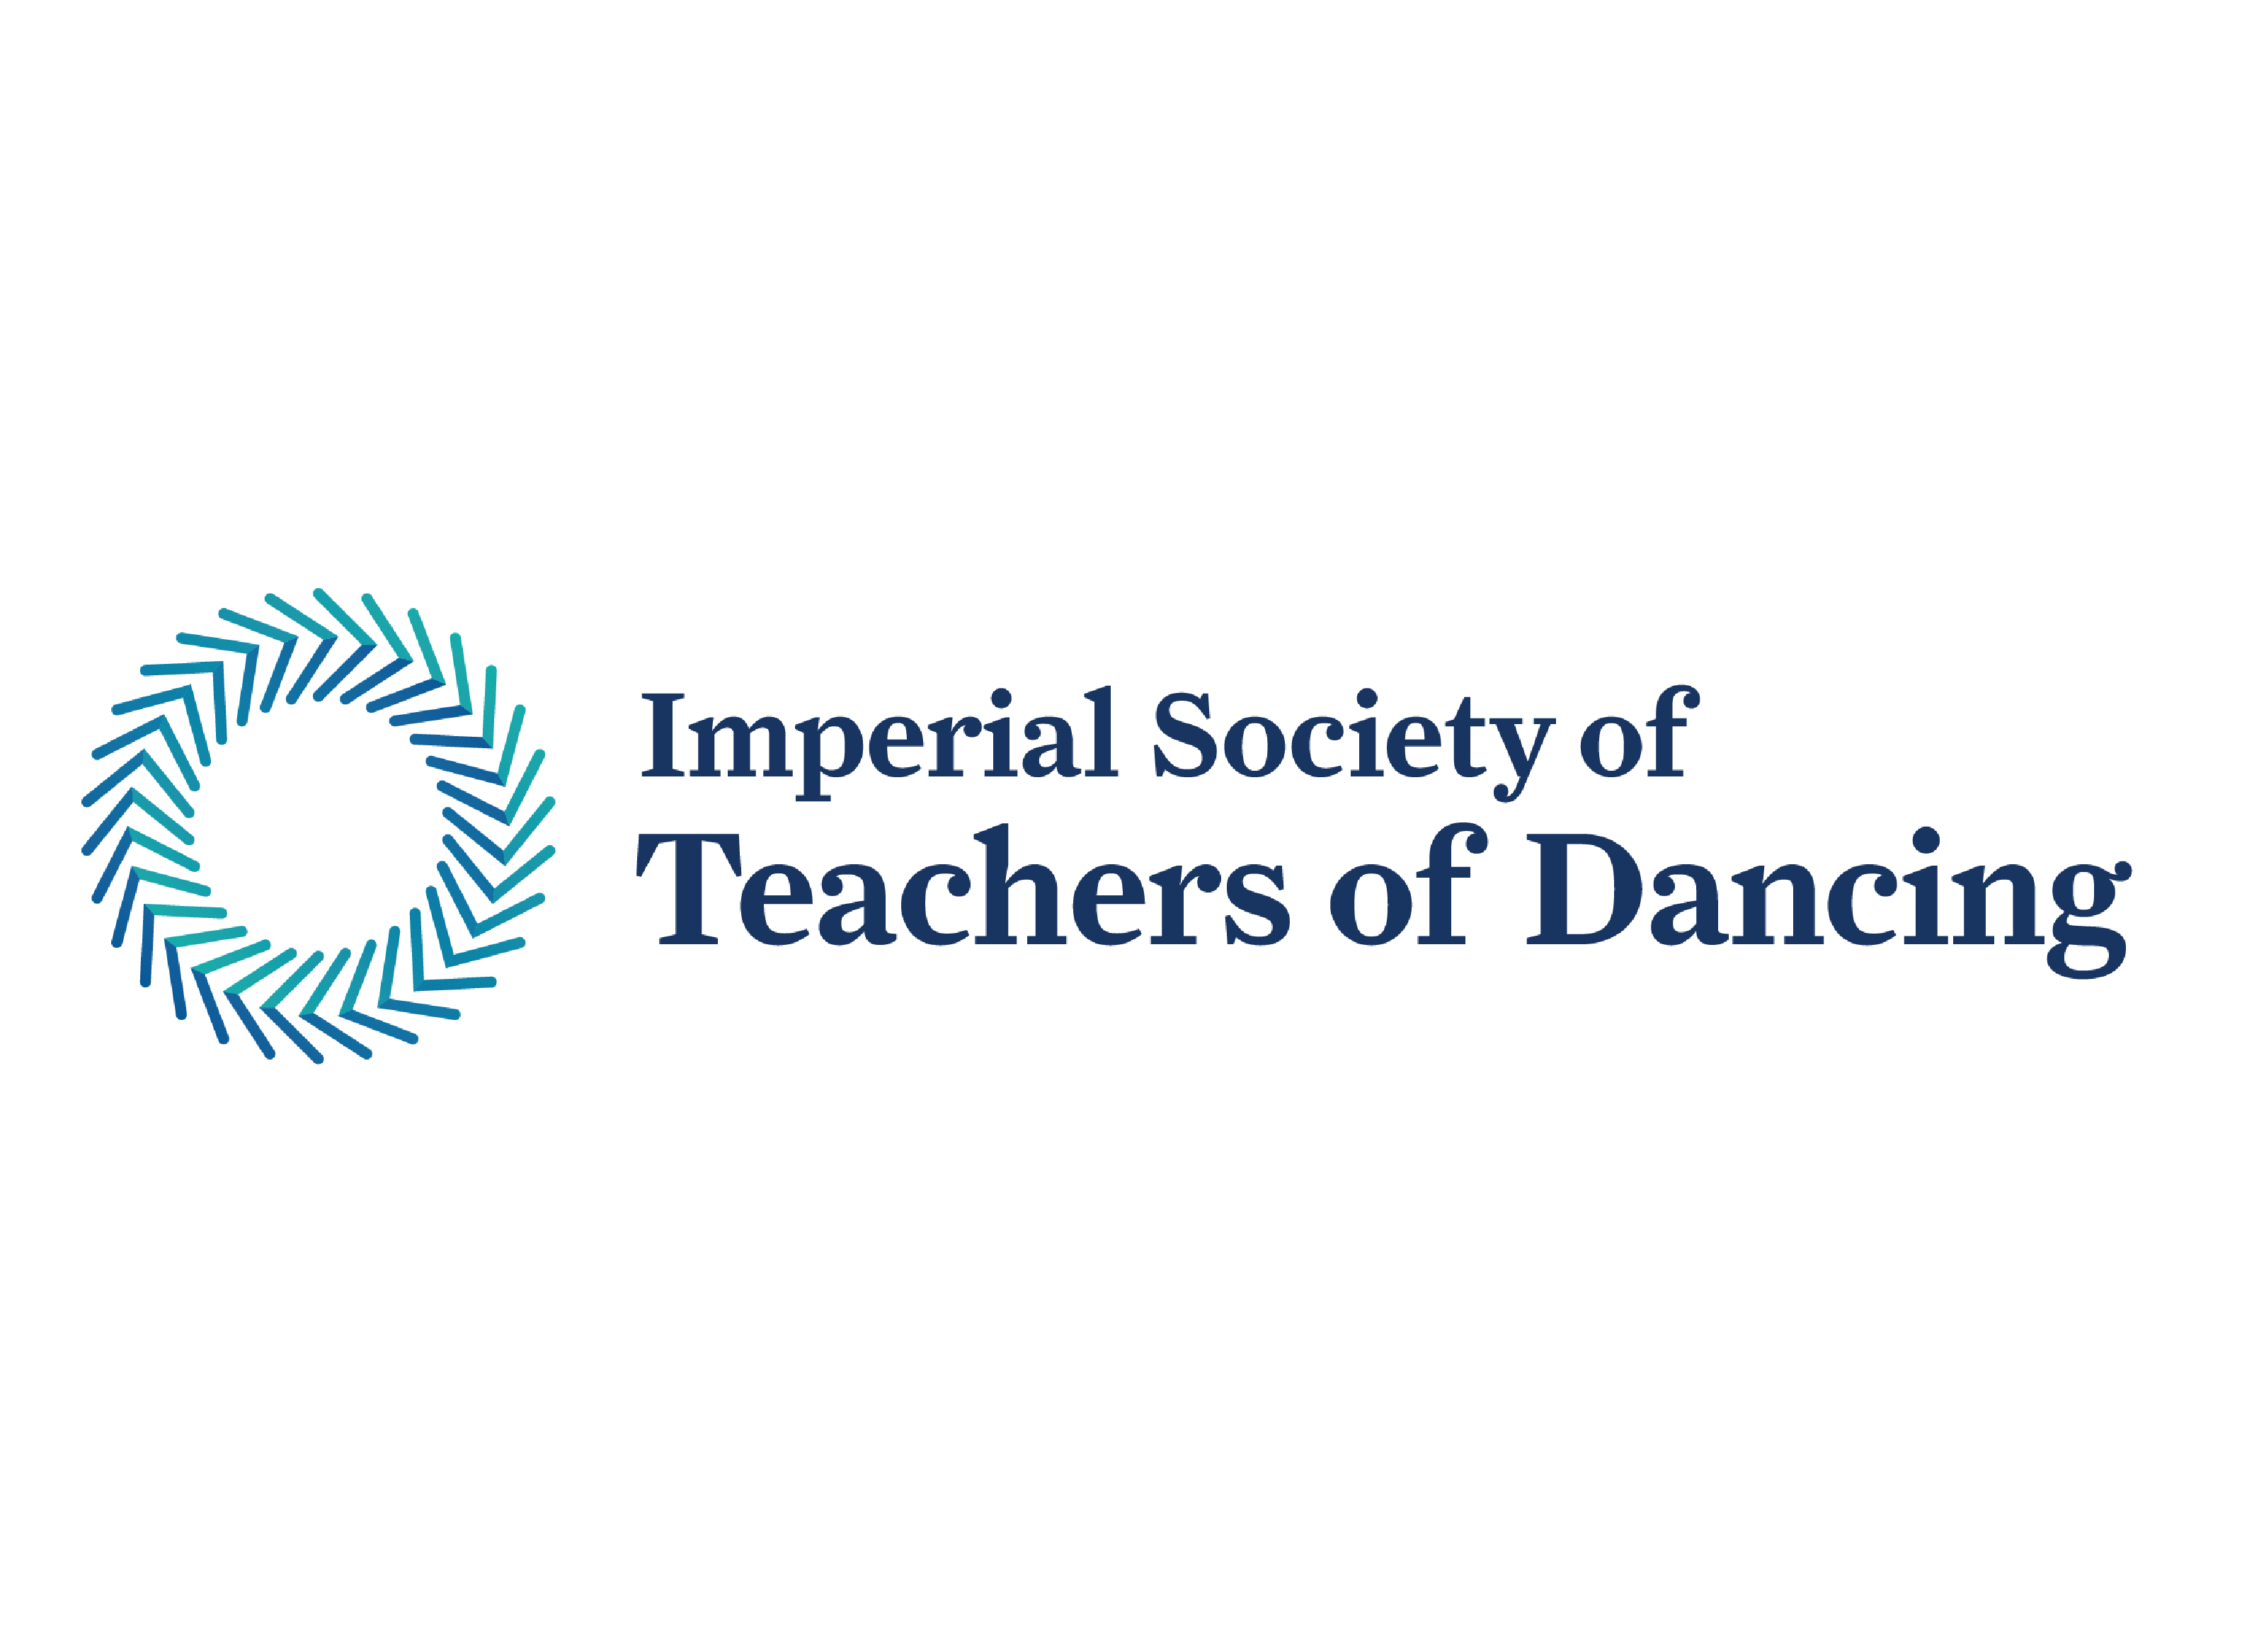 Imperial Society of Teachers of Dancing (ISTD)